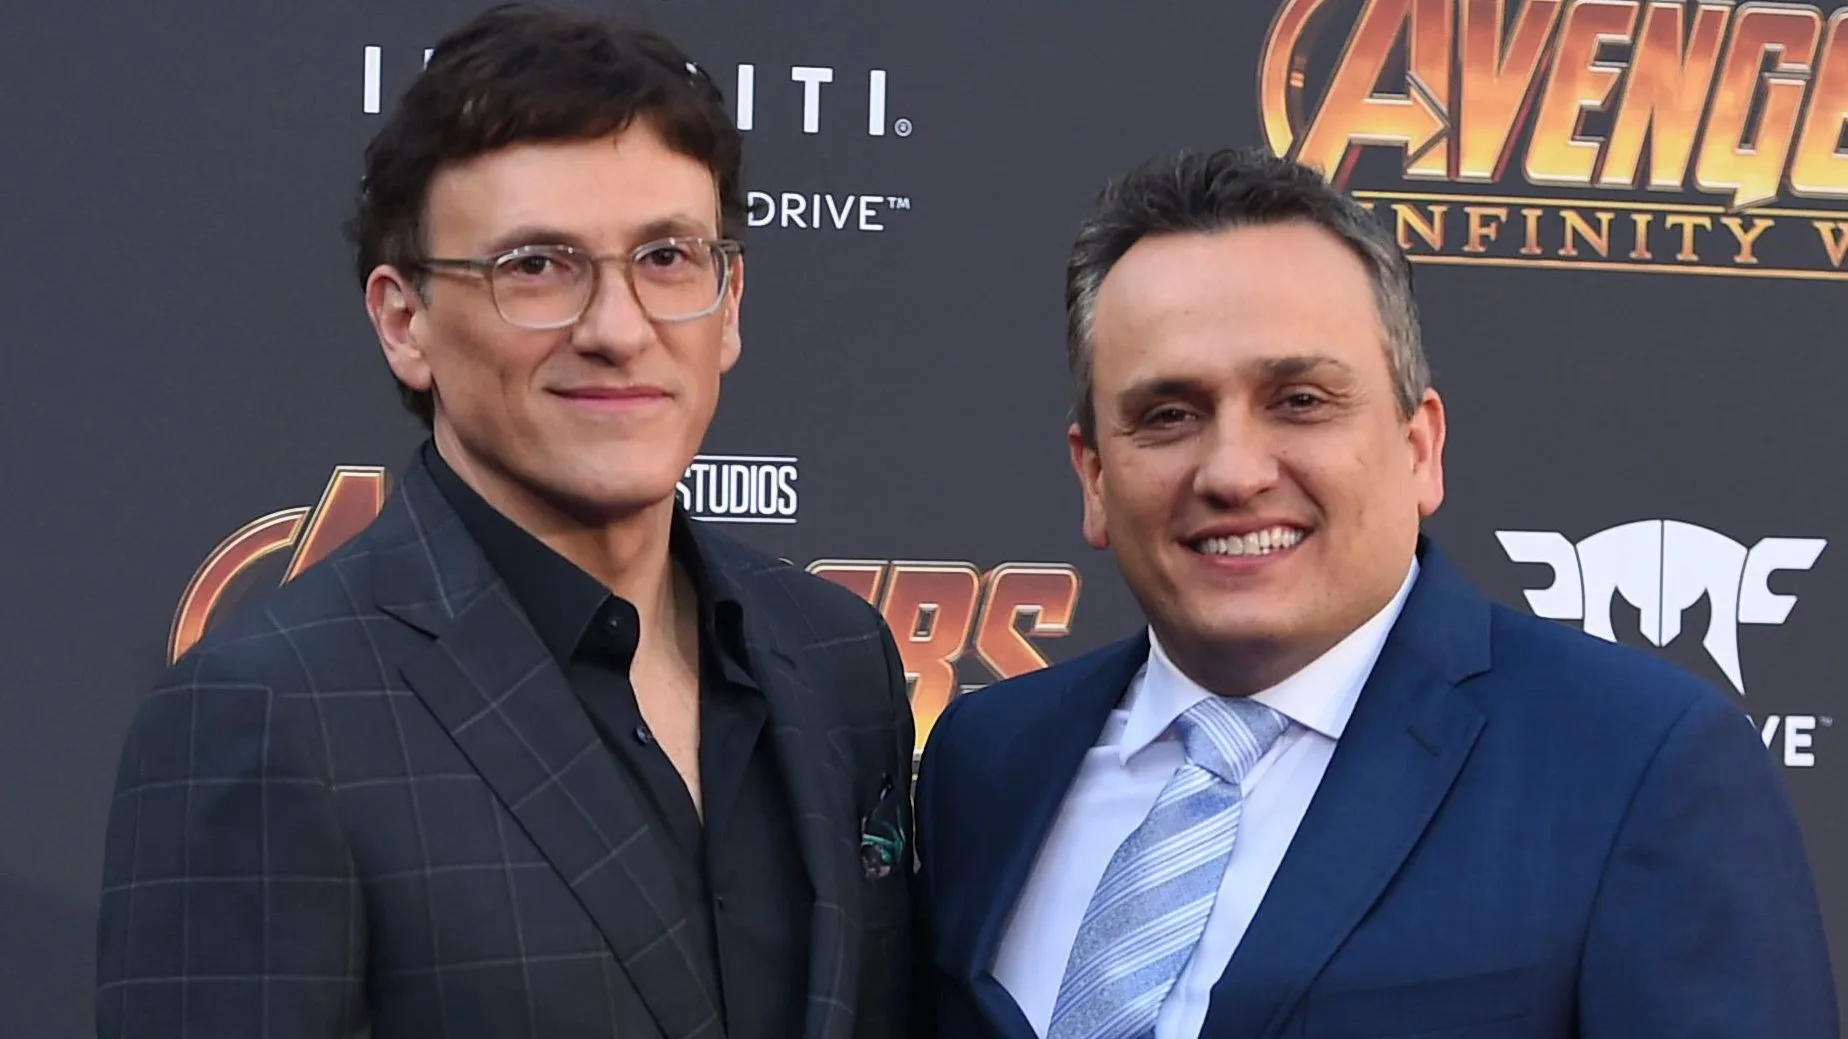 After Avengers, Russo Brothers Are Back With New Thriller Series